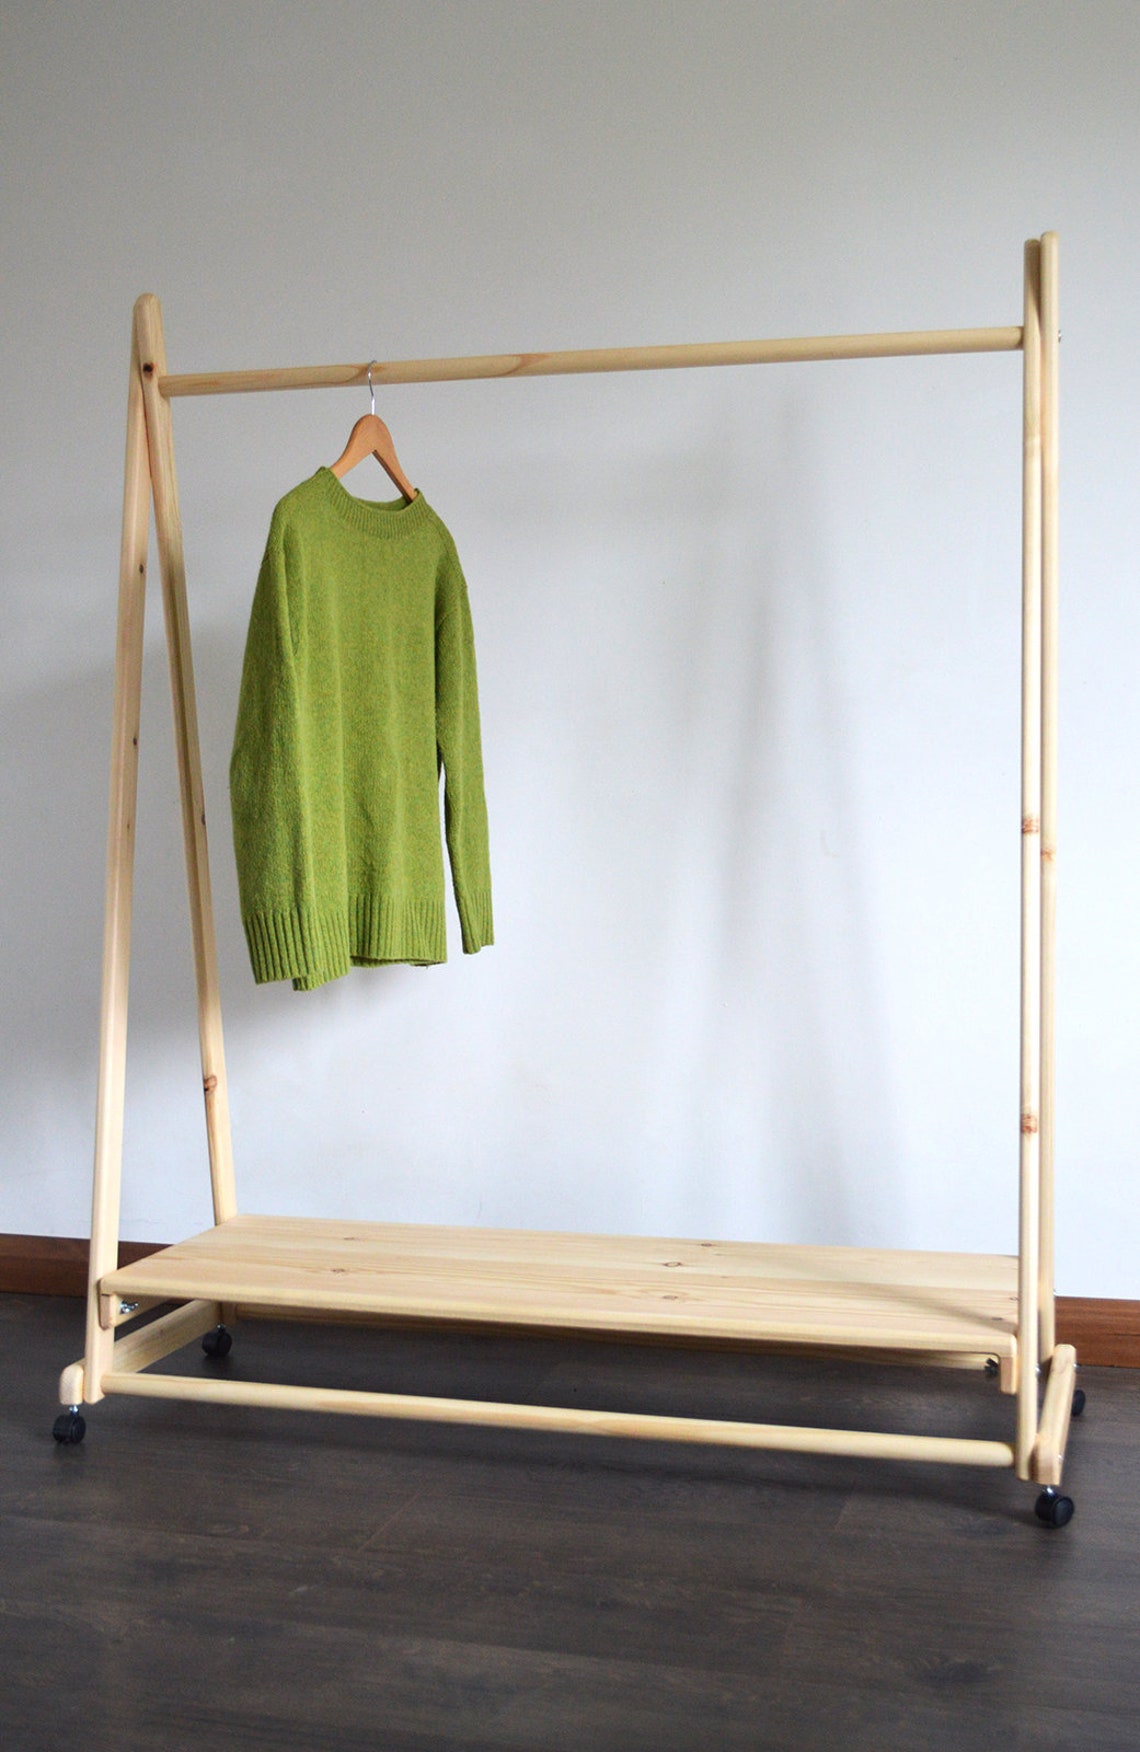 Handmade Natural Wood Clothes Rail With Shelf and Wheels - Etsy UK